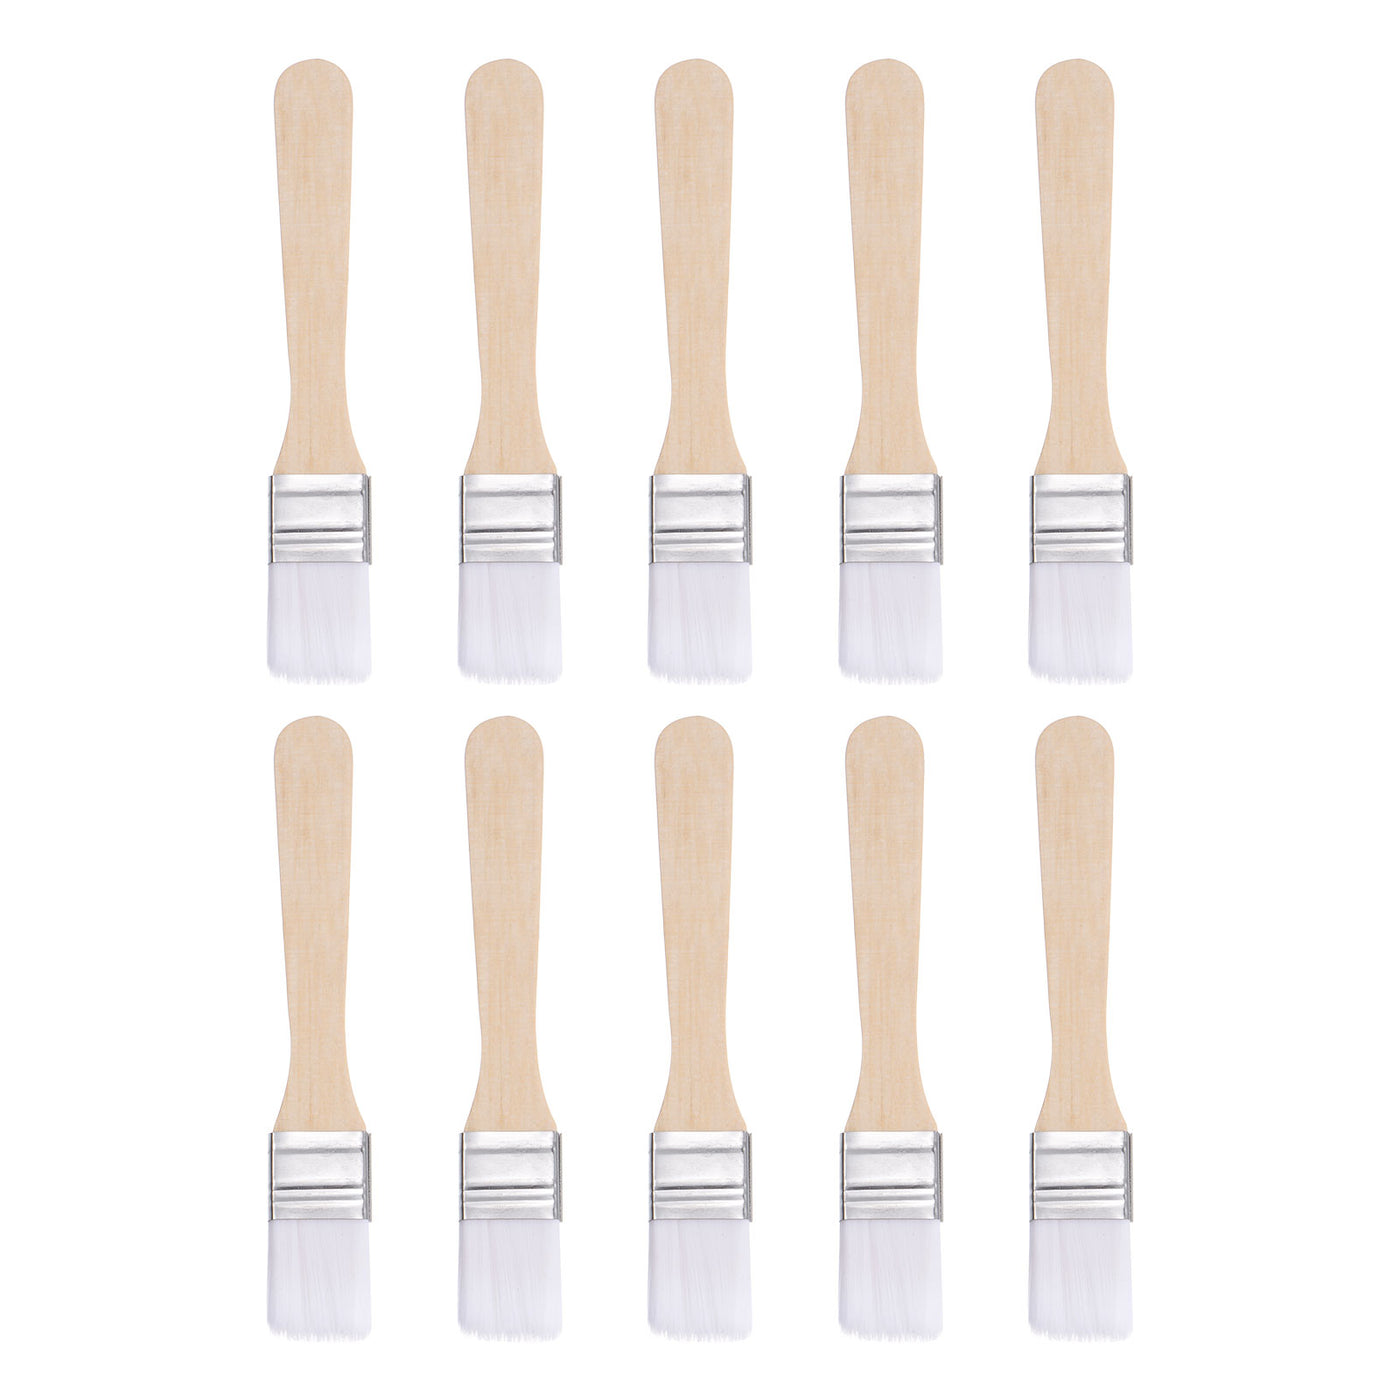 uxcell Uxcell 0.9" Width Small Paint Brush Nylon Bristle with Wood Handle Tool, White 10Pcs